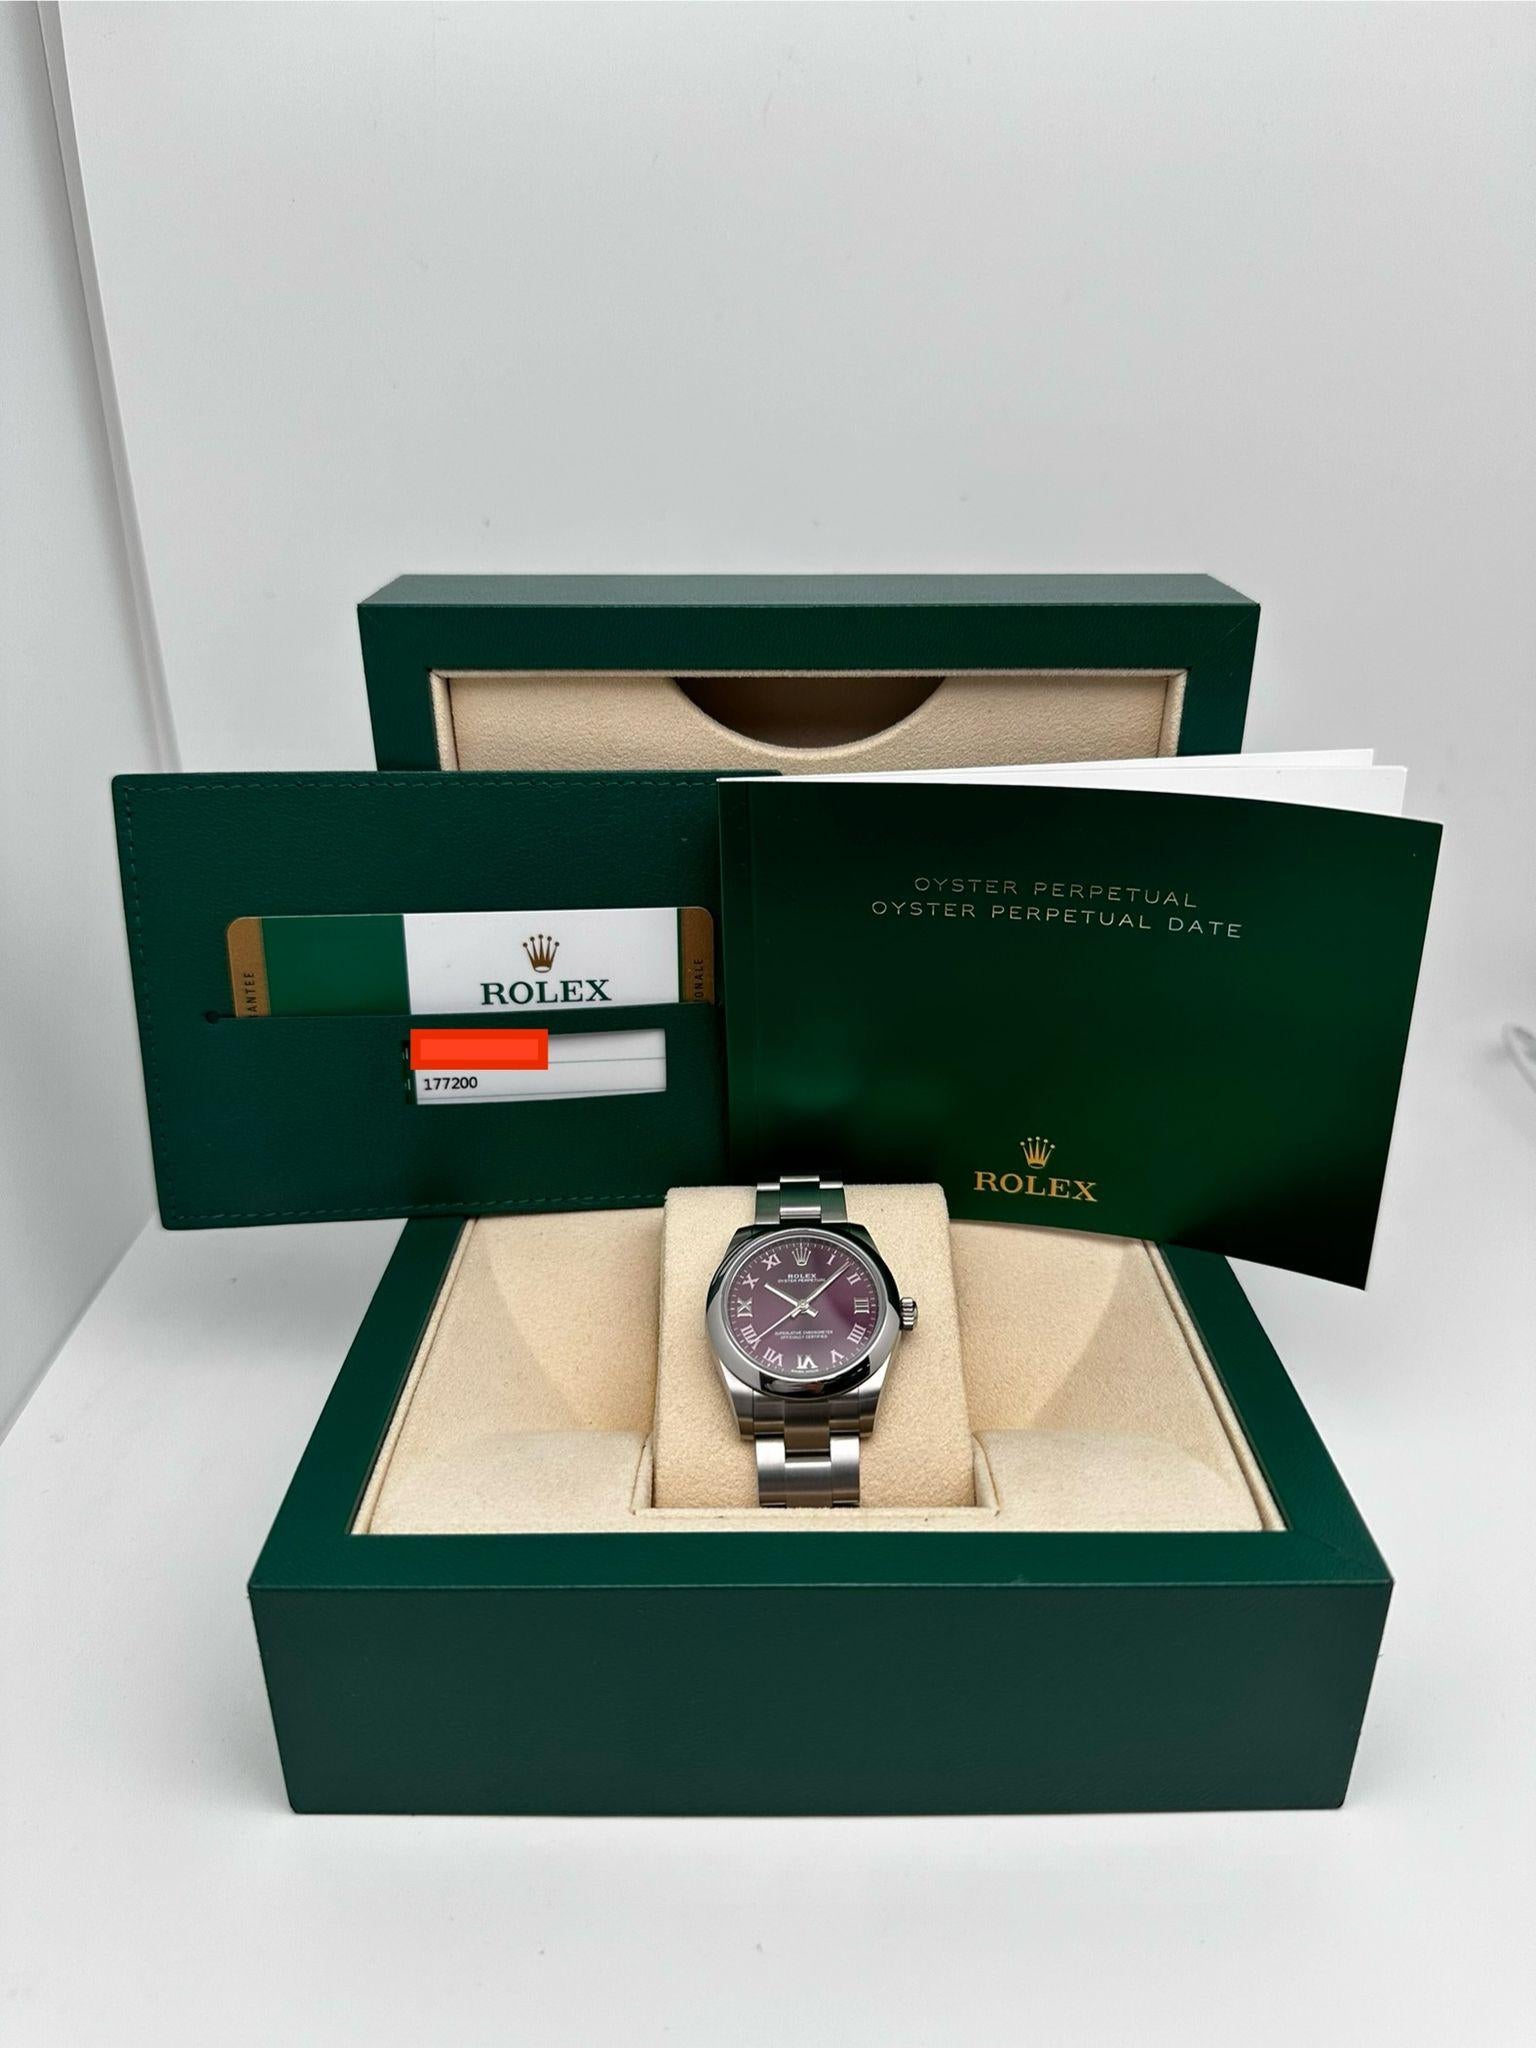 Pre-owned in excellent condition. 2019 Card. Box and papers included. 

* Free Shipping within the USA
* Two-year warranty coverage
* 14-day return policy with a full refund. Buyers can verify the watch's authenticity at any boutique or dealership